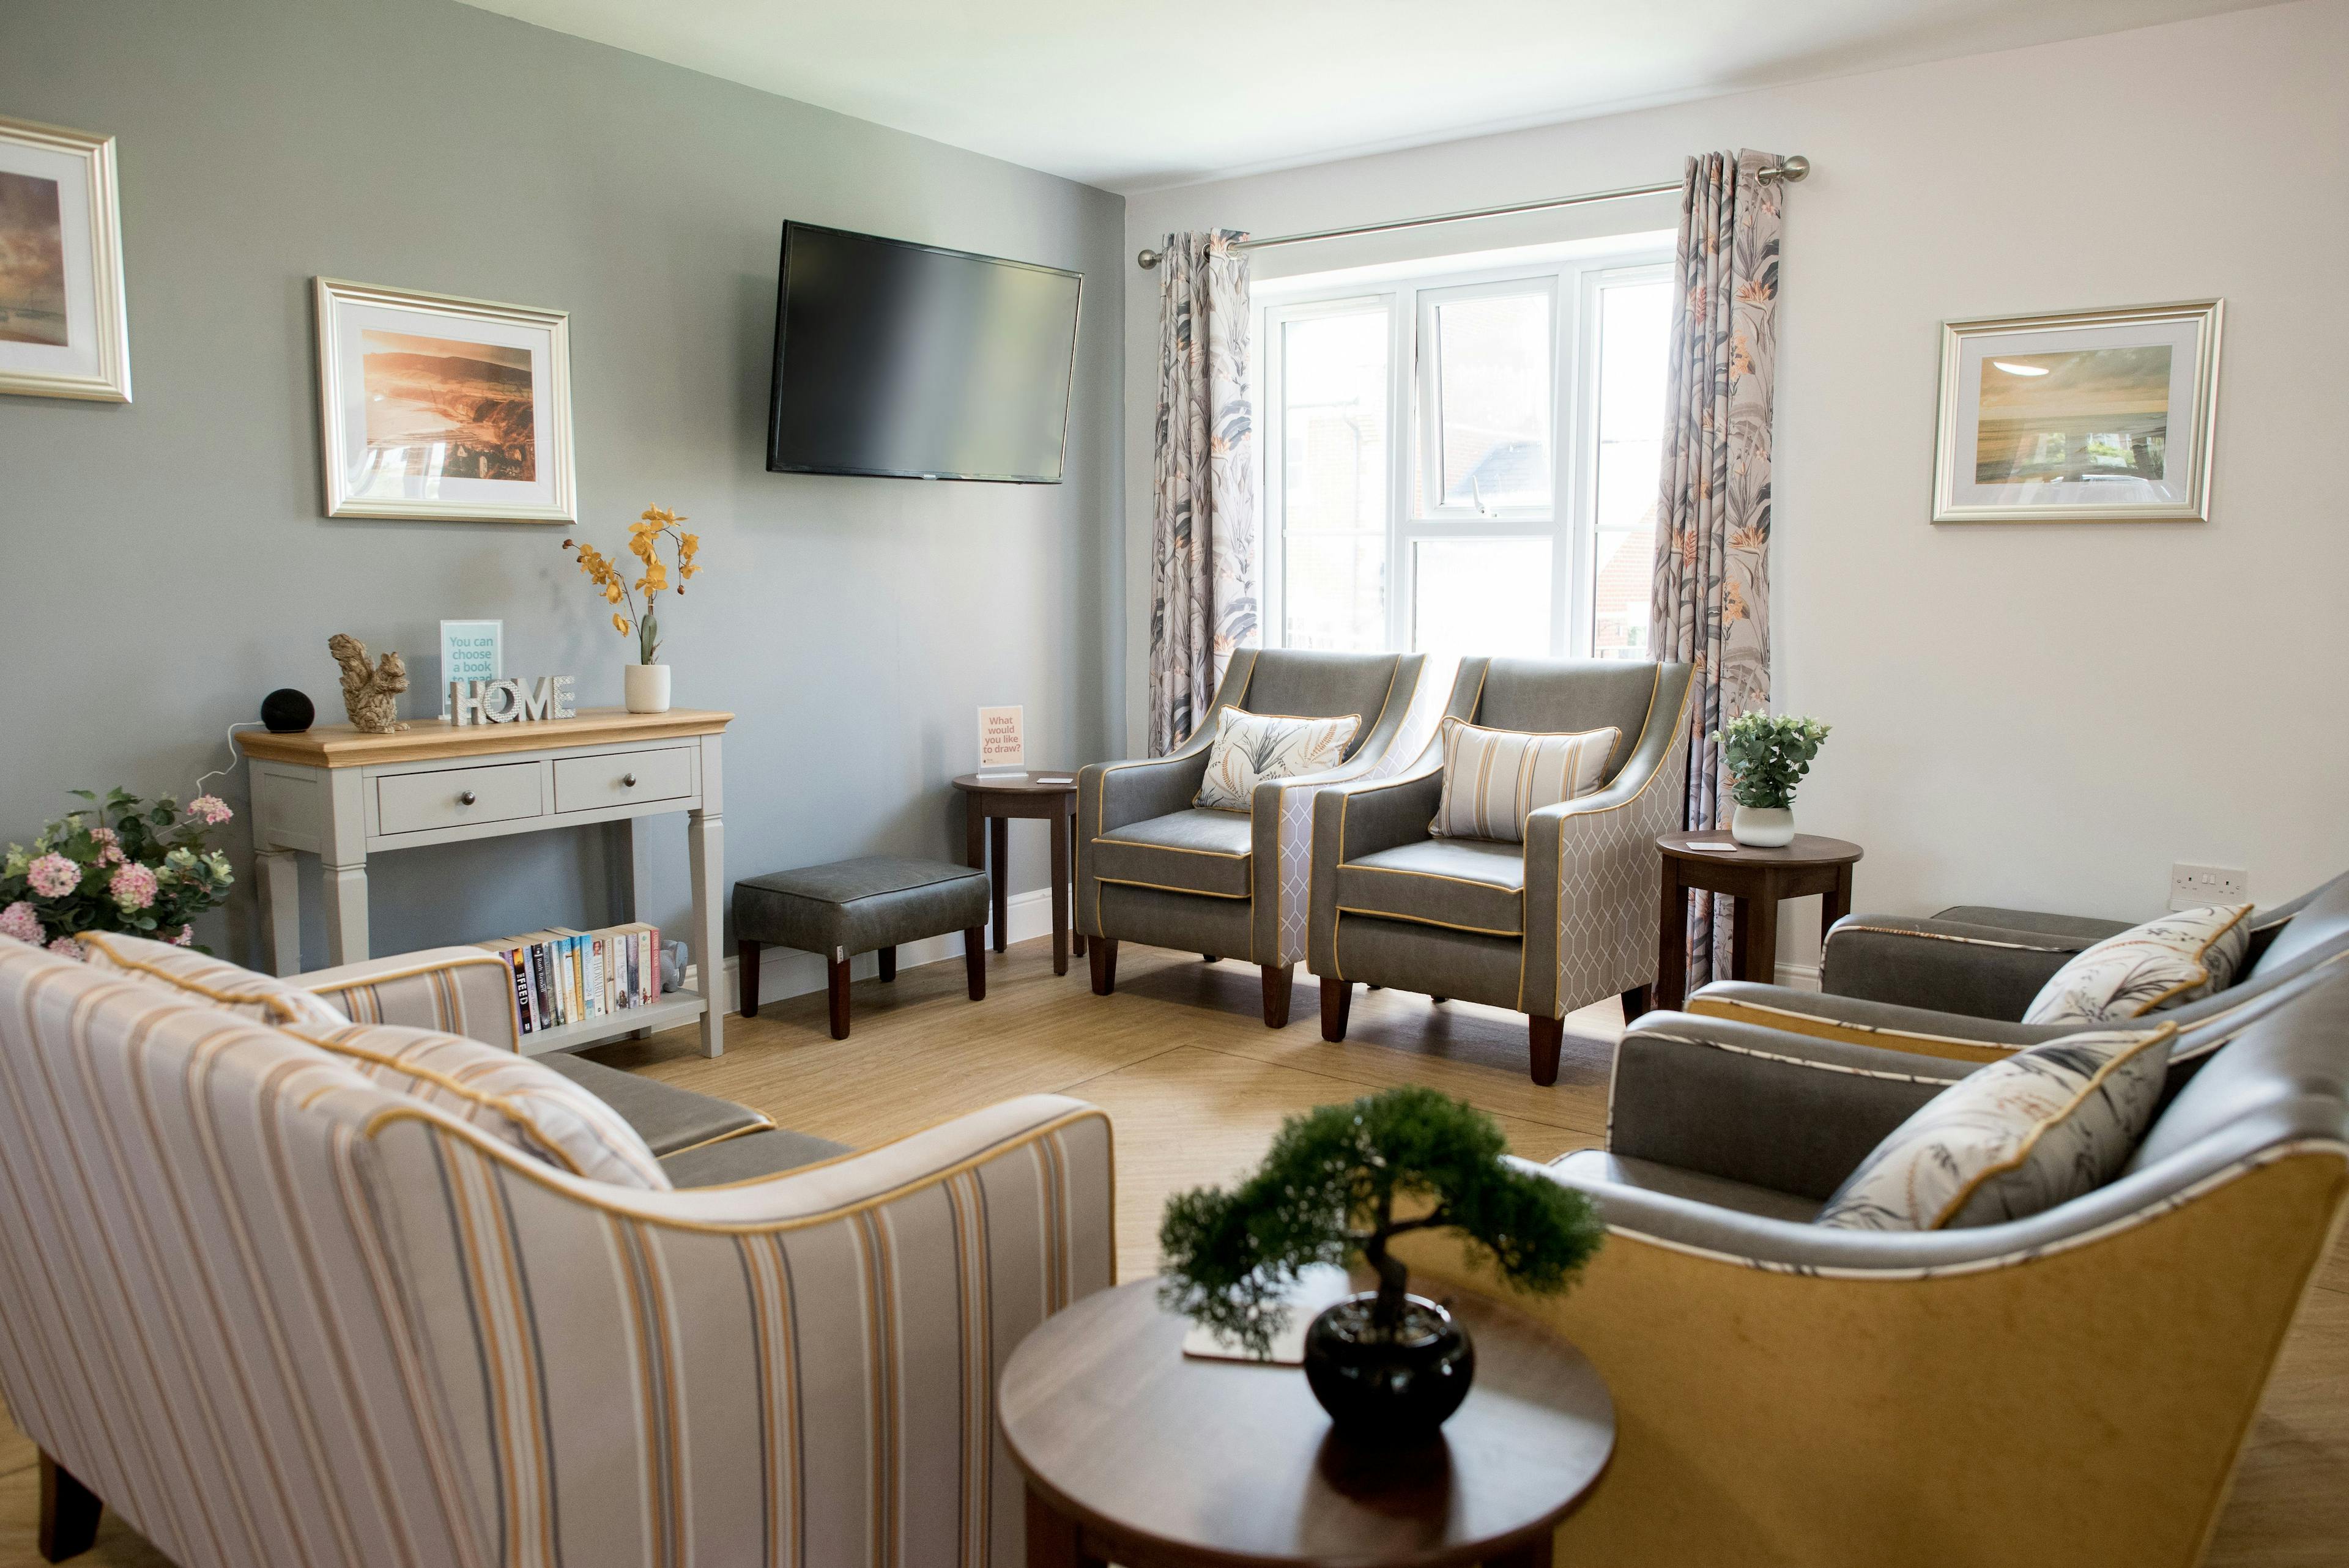 Lounge at Cedars House Care Home in Halstead, Braintree